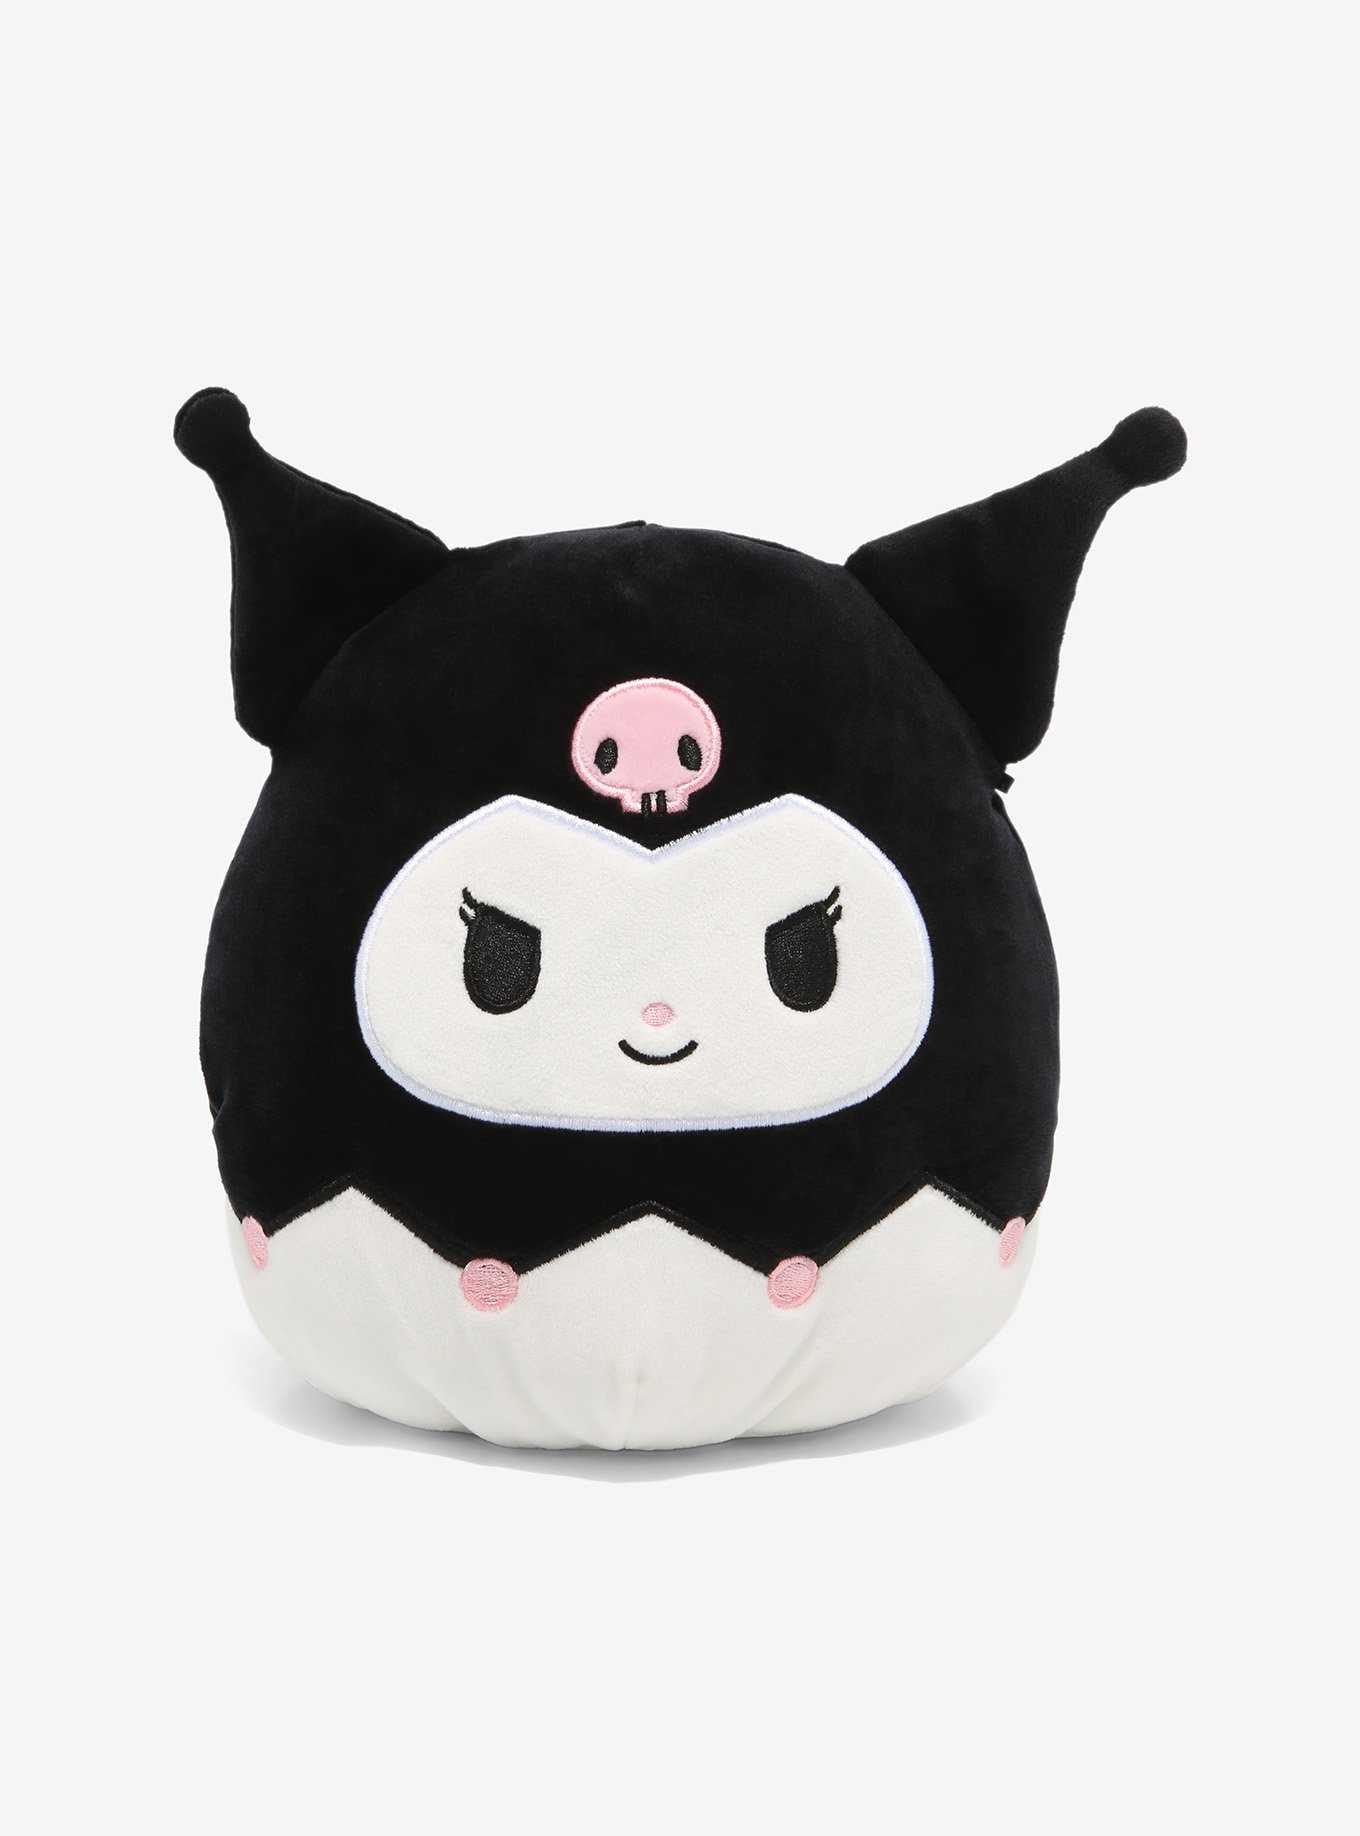 Squishmallows are adorable, but their online fandom has a dark side